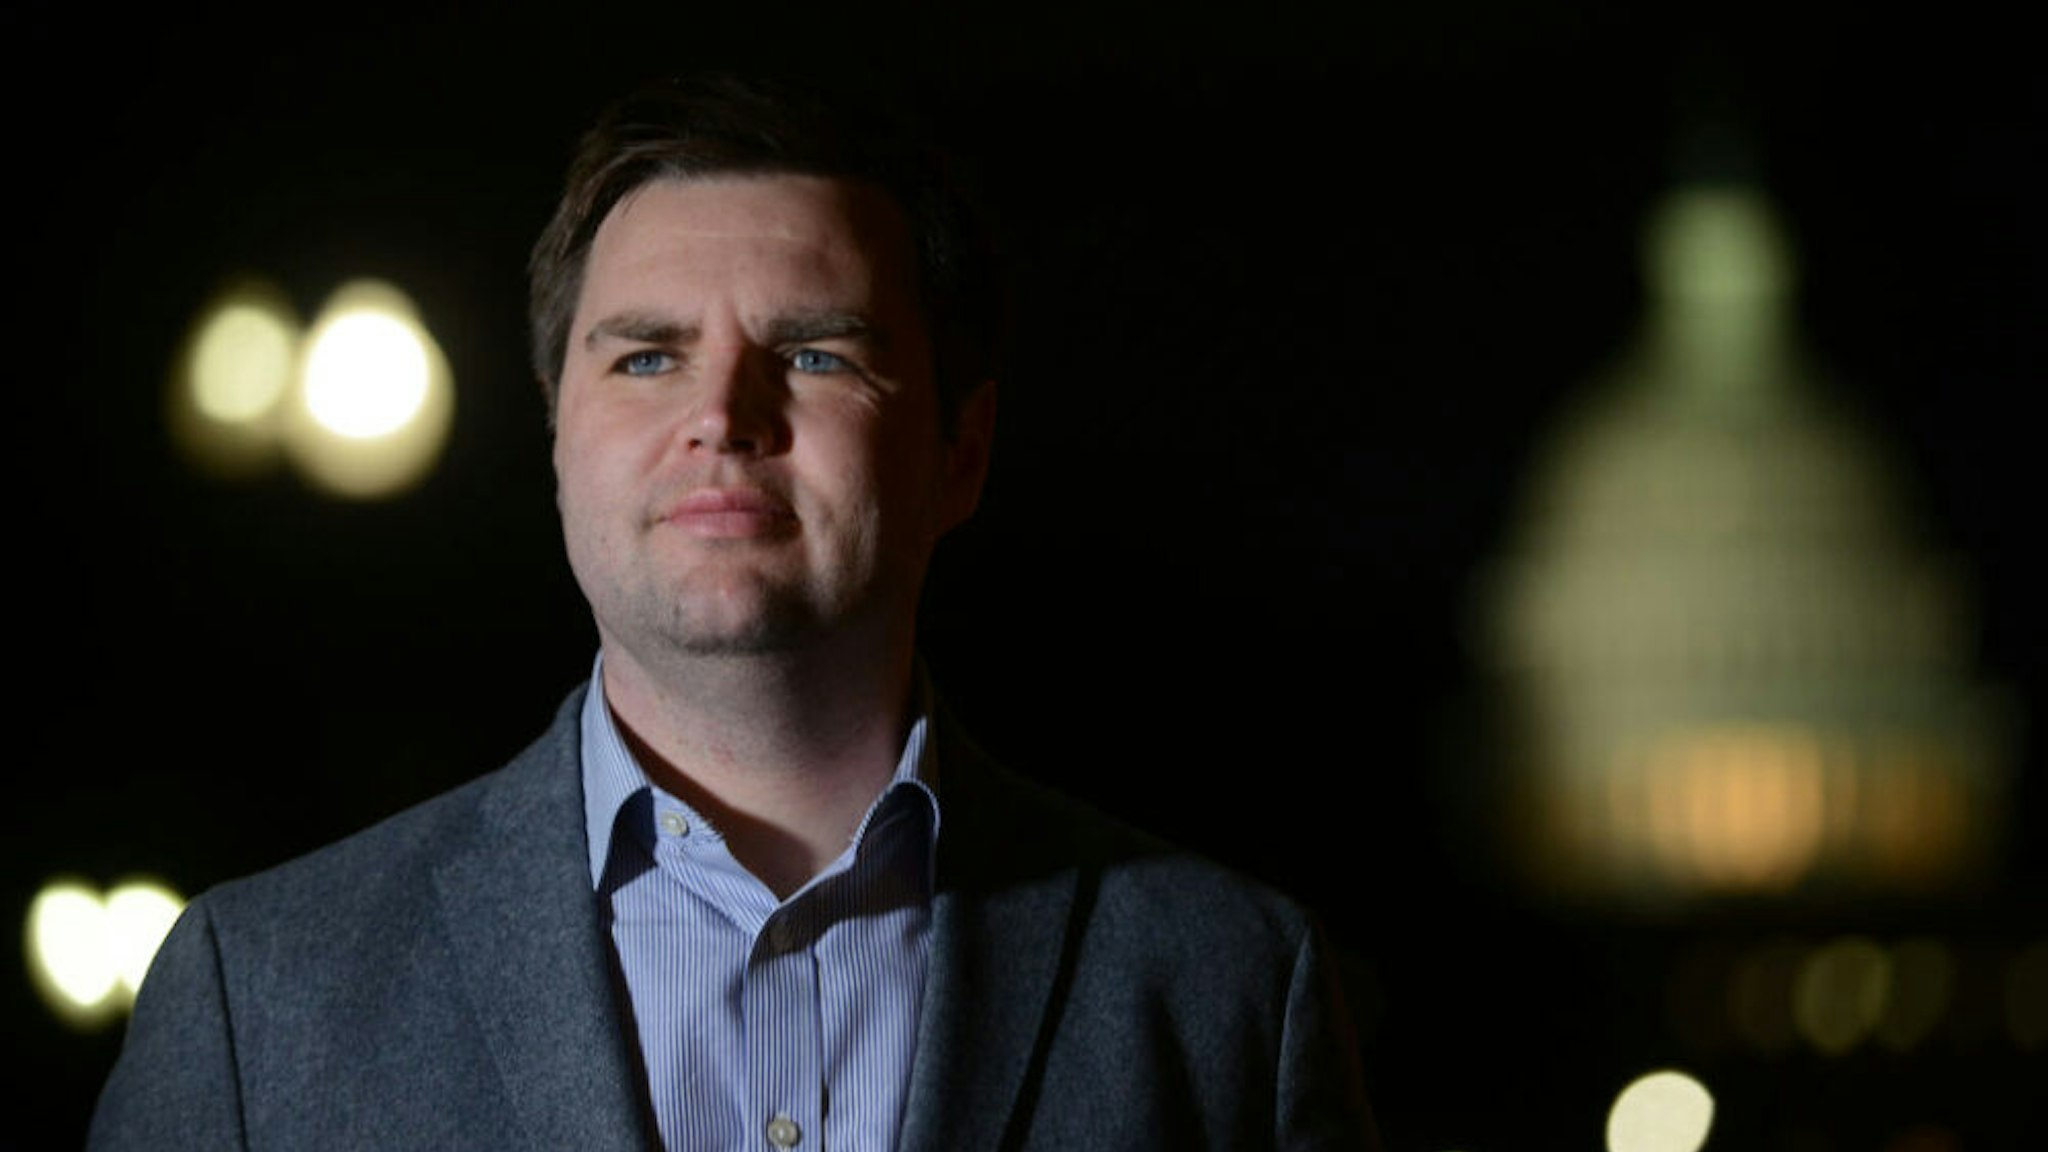 WASHINGTON, DC - JANUARY 27: J.D. Vance, author of the book "Hillbilly Elegy," poses for a portrait photograph near the US Capitol building in Washington, D.C., January 27, 2017. Vance has become the nation's go-to angry, white, rural translator. The book has sold almost half a million copies since late June. Vance, a product of rural Ohio, a former Marine and Yale School grad, has the nation's top-selling book. He's become a CNN commentator, in-demand speaker, and plans to move back to Ohio from SF where he's worked as a principal in an investment firm.